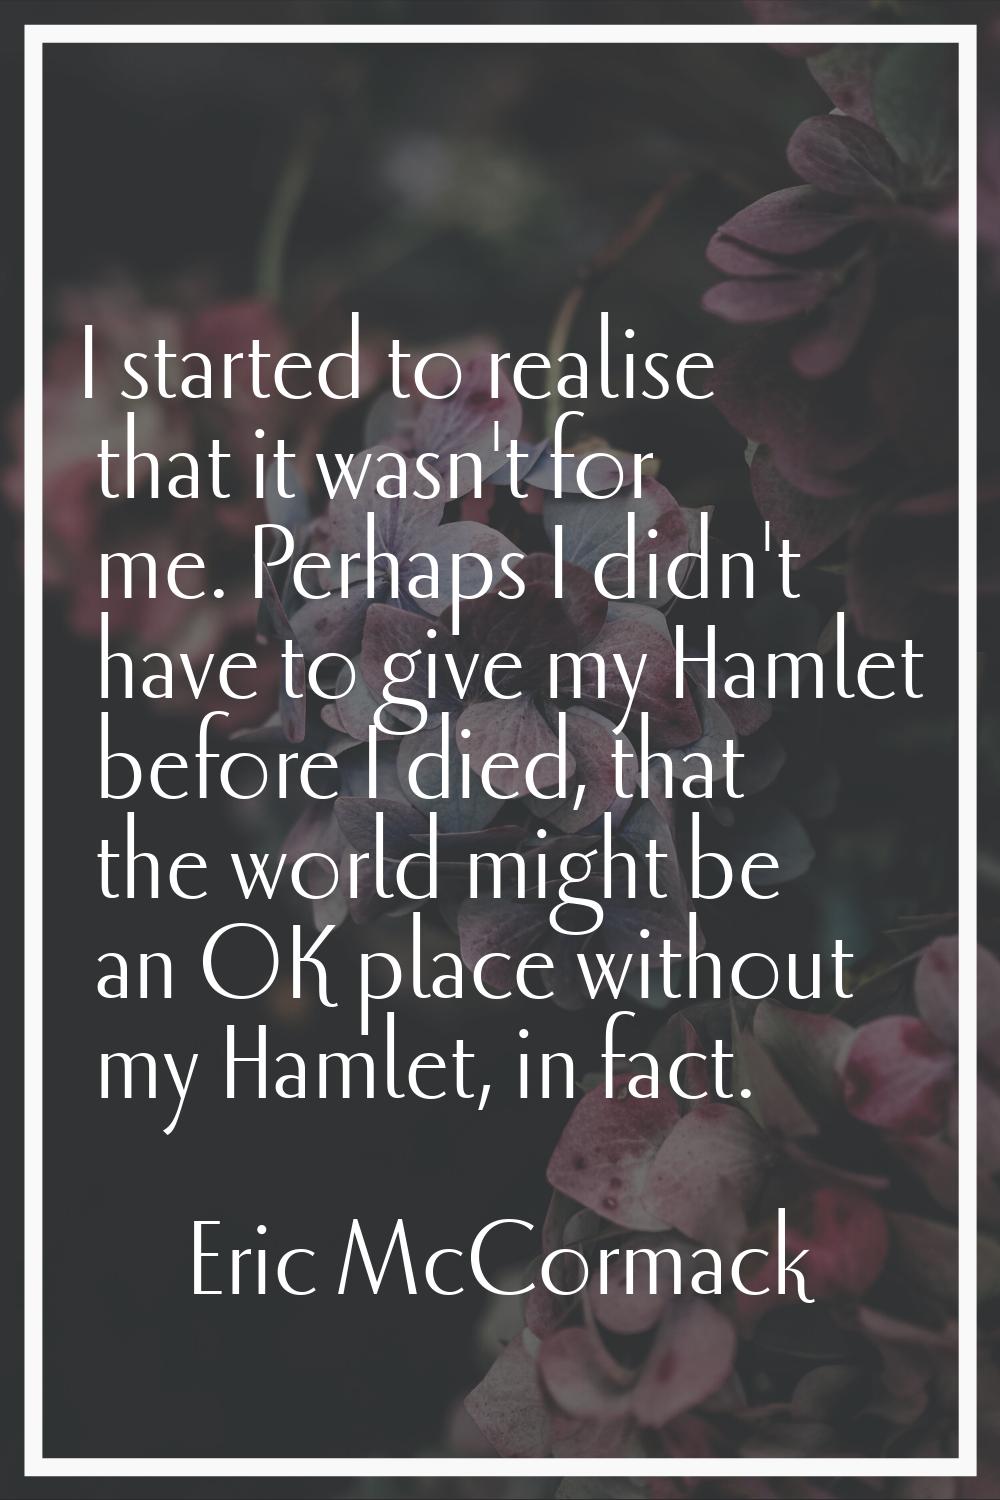 I started to realise that it wasn't for me. Perhaps I didn't have to give my Hamlet before I died, 